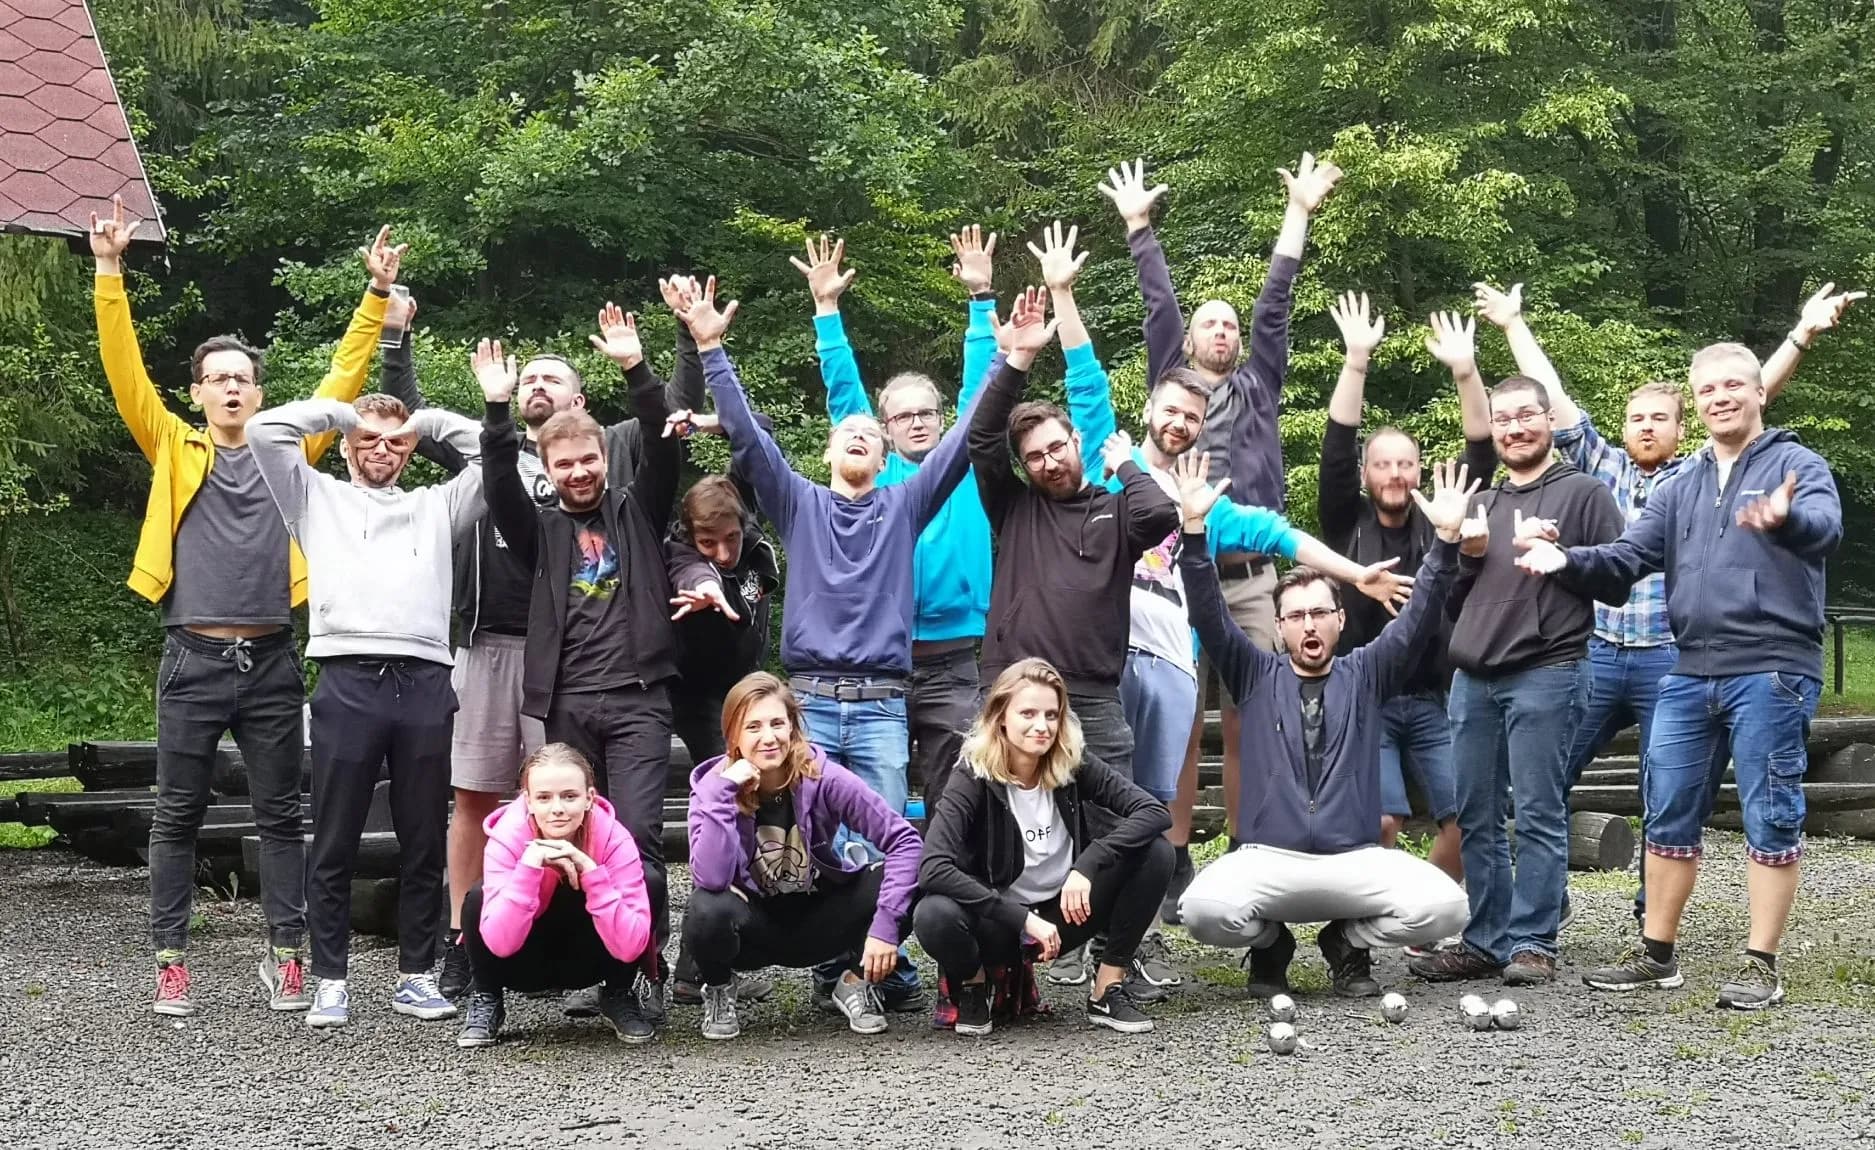 A group of 18 Revolve Healthcare employees looking happy with their hands in the air during an outdoor company retreat